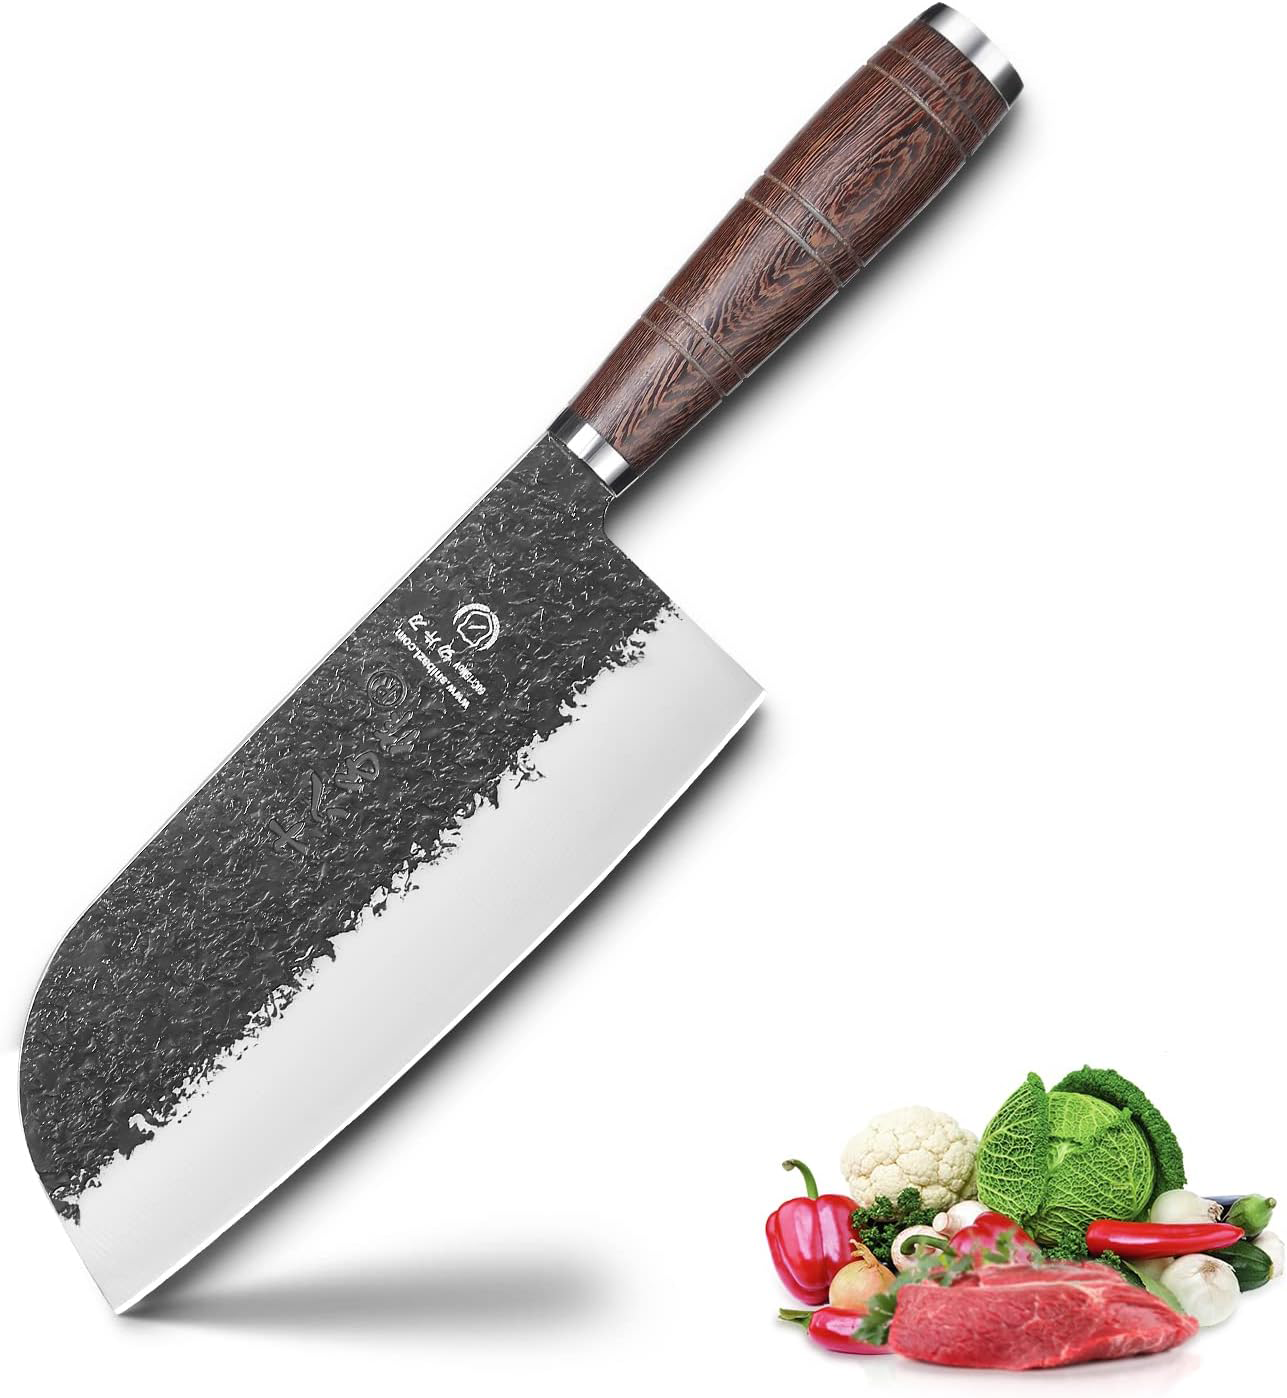 KD Hand-Forged Cleaver: The Perfect Kitchen Companion